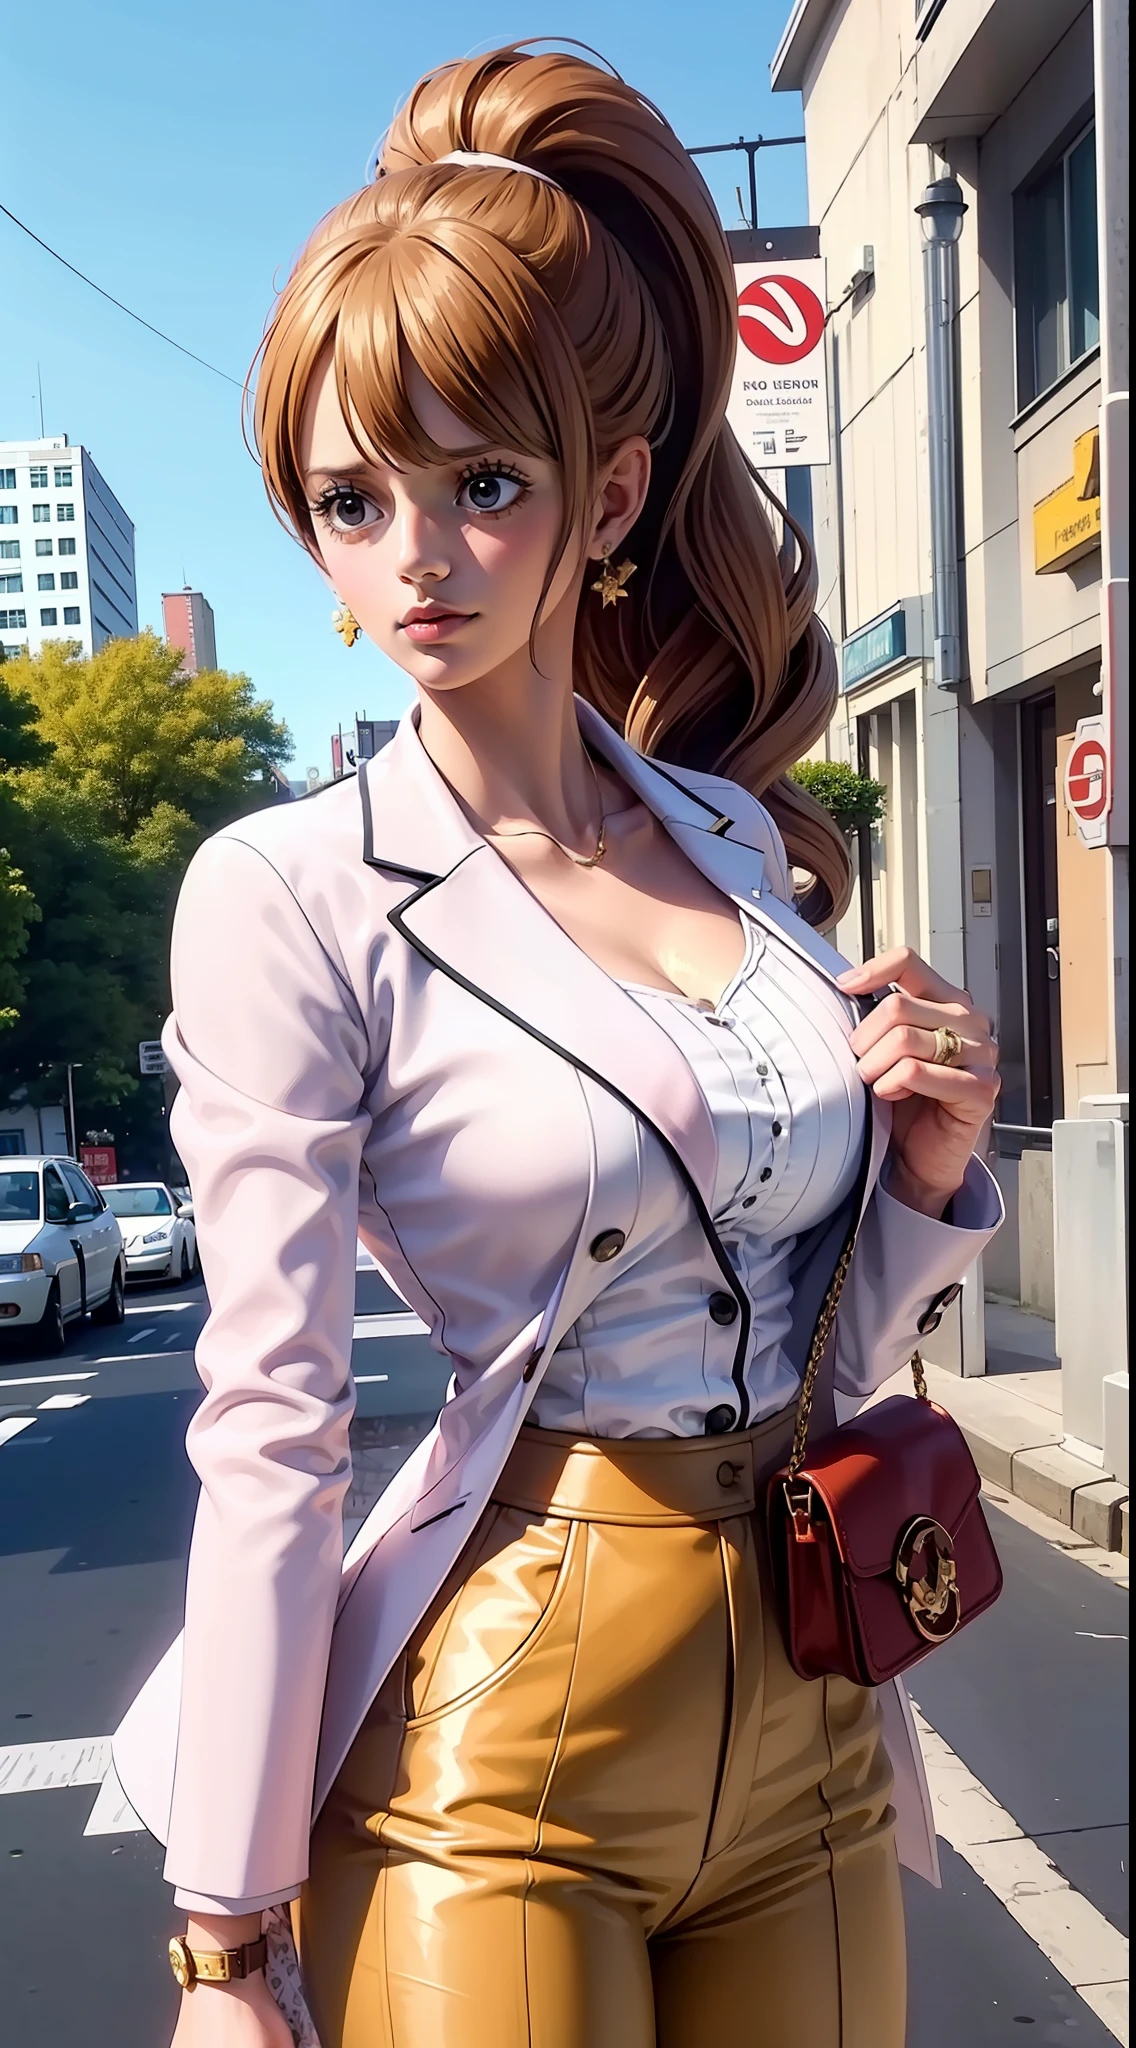 pudding from anime one piece, brown hair, hair tie, bangs, ponytail, perfect body, perfect breasts, beautiful woman, very beautiful, wearing a red formal shirt, neat dress, formal attire, wearing a white blazer, white pants, wears handbag, wearing watch, wearing earrings, being in the city, roadside, public place, Realism, masterpiece, textured leather, super detailed, high detailed, high quality, best quality, 1080P, HD, 16k